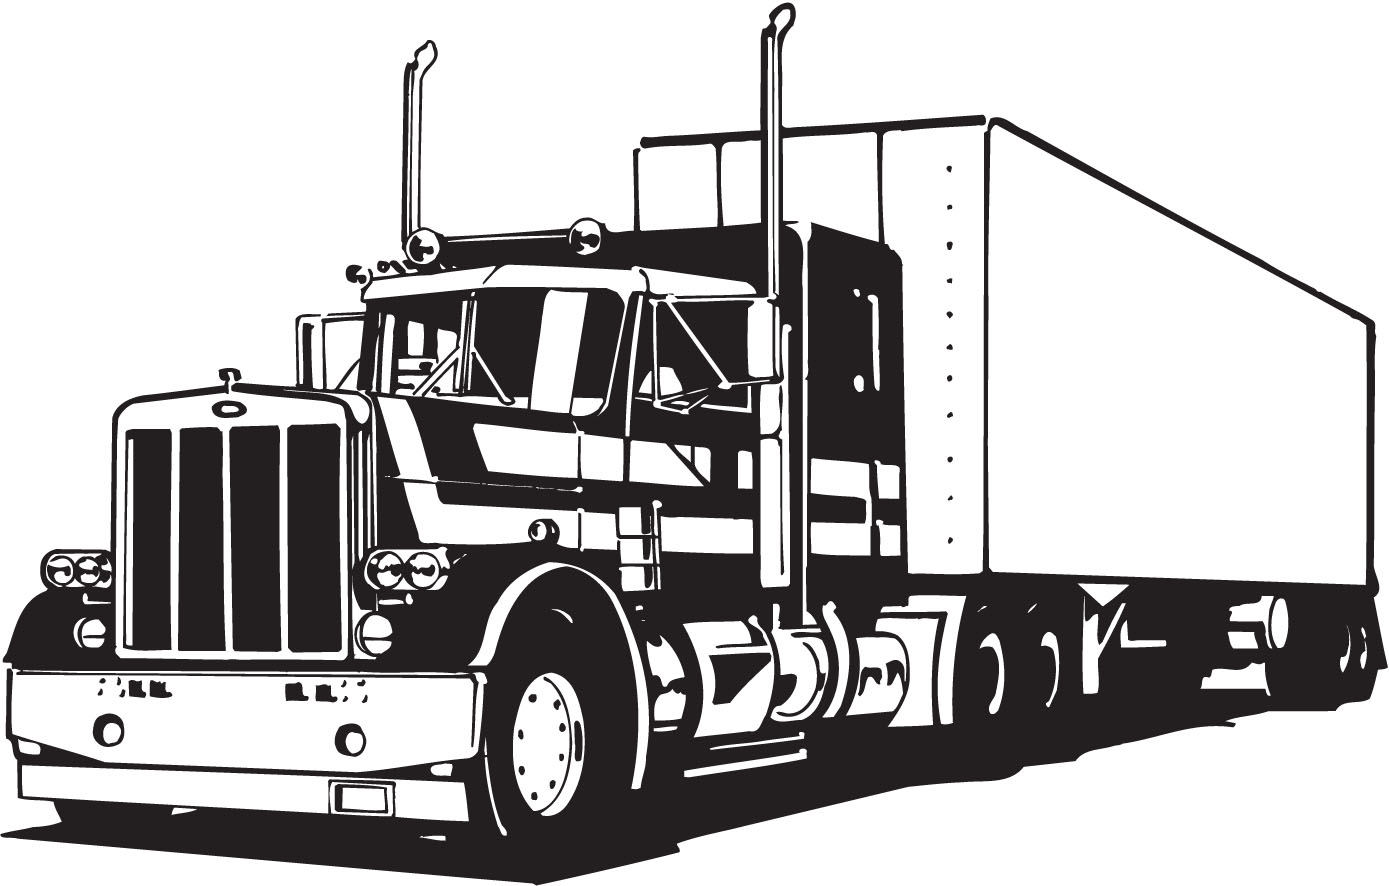 Tractor trailer clipart flatbed silhouette